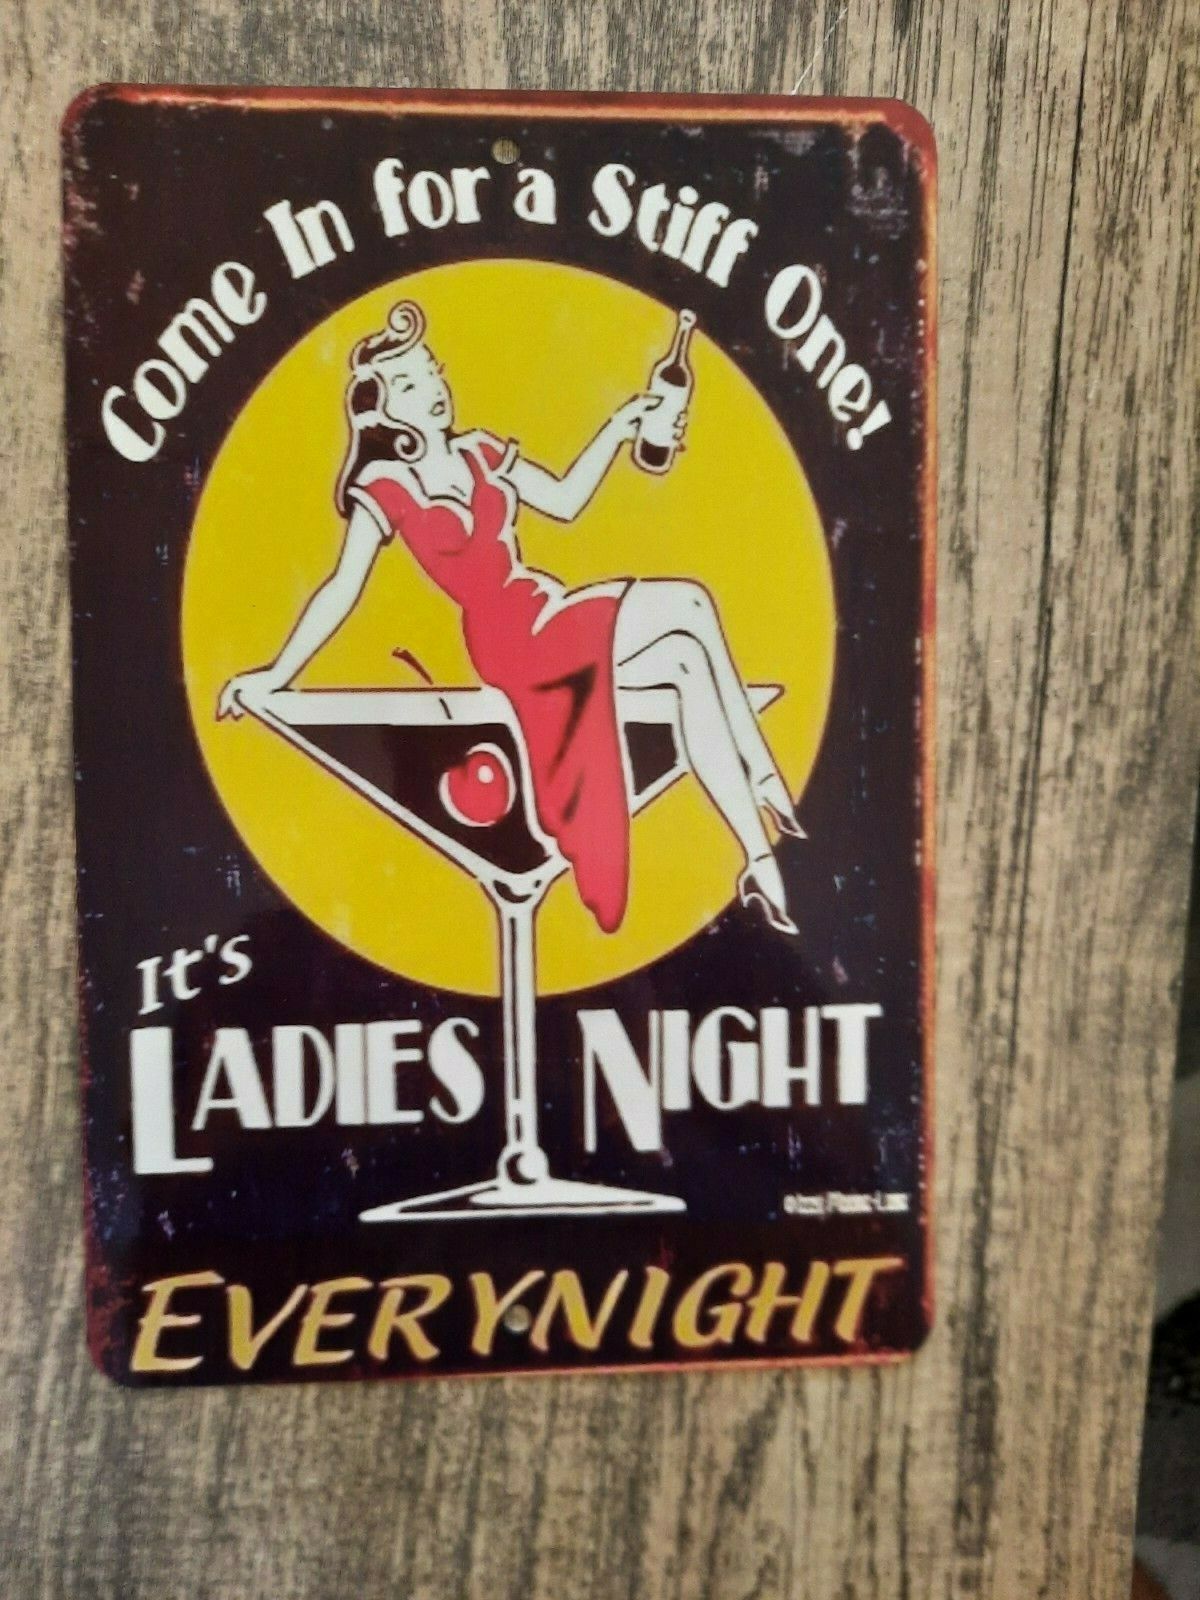 Come in for a Stiff One Ladies Night Every night 8x12 Metal Wall Bar Sign